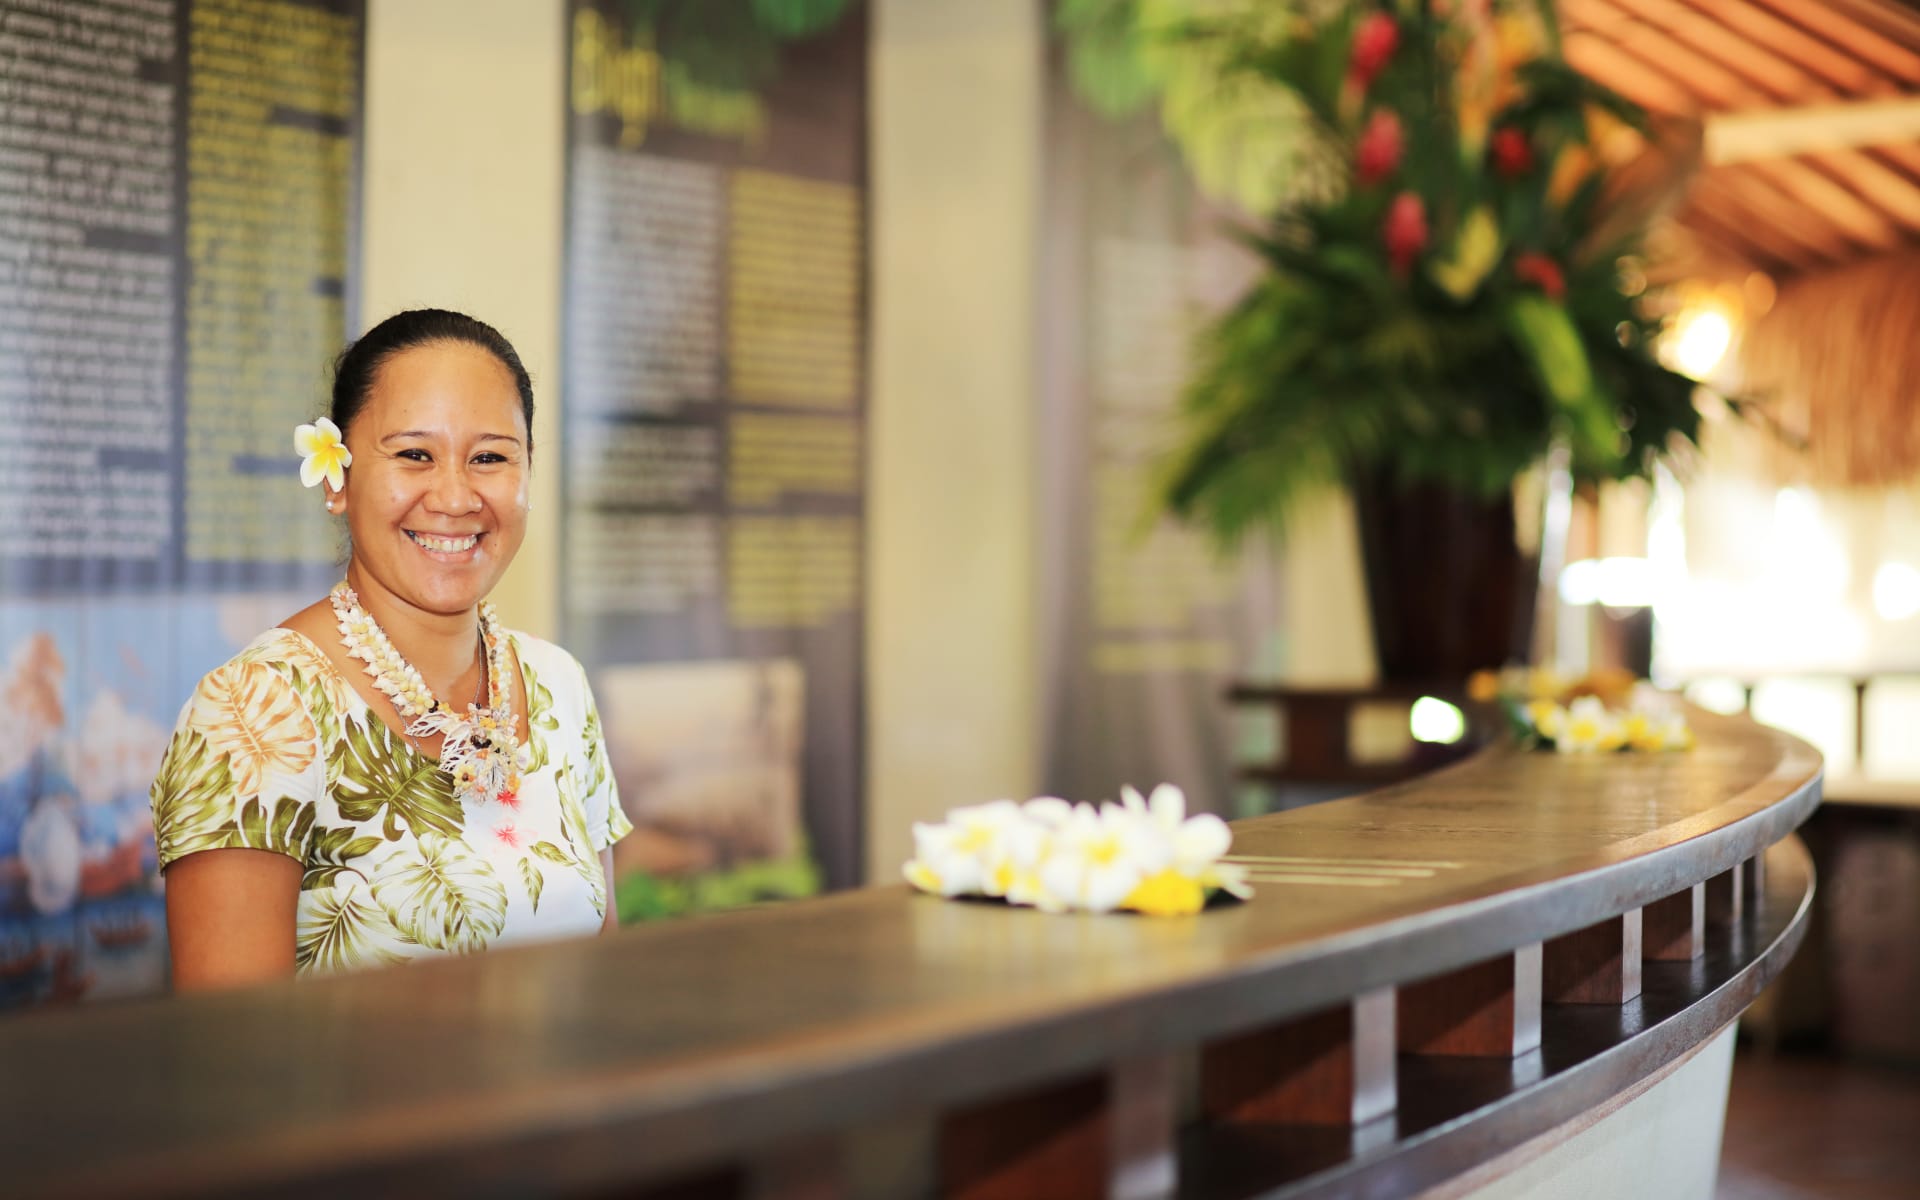 Lady at reception providing guests with a warm smile